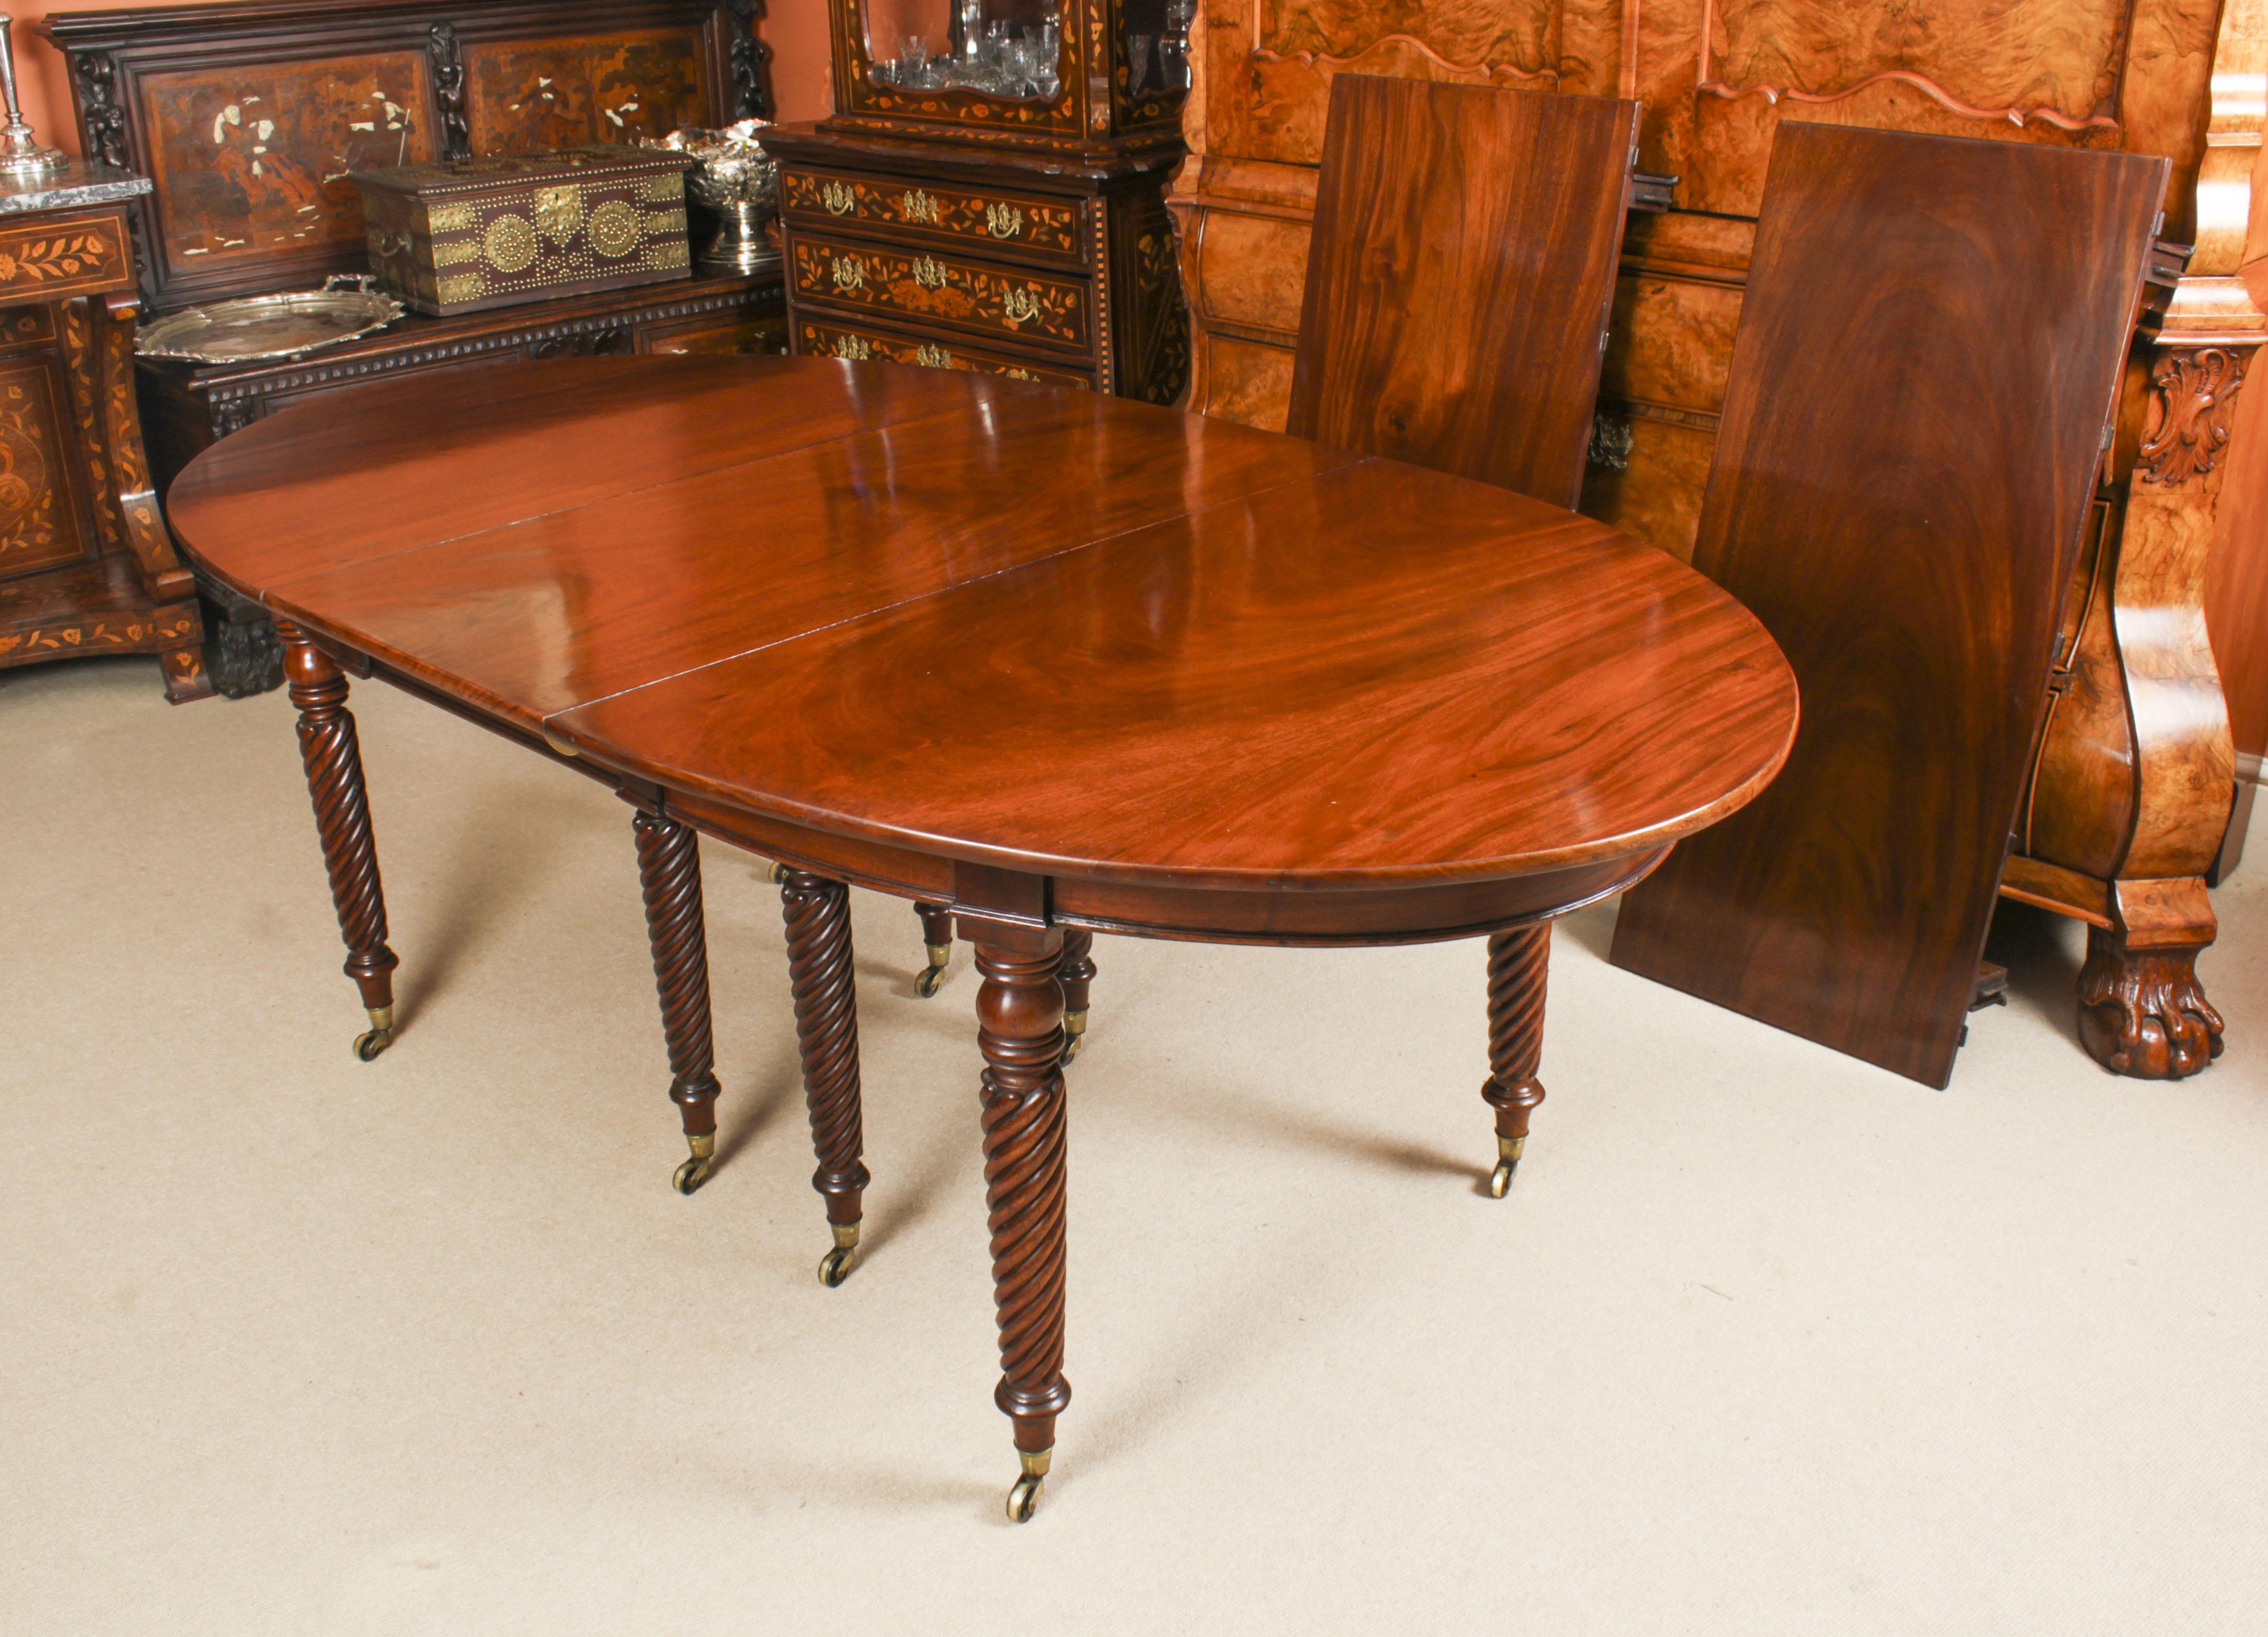 Mahogany Antique Regency Concertina Action Dining Table 19th Century For Sale